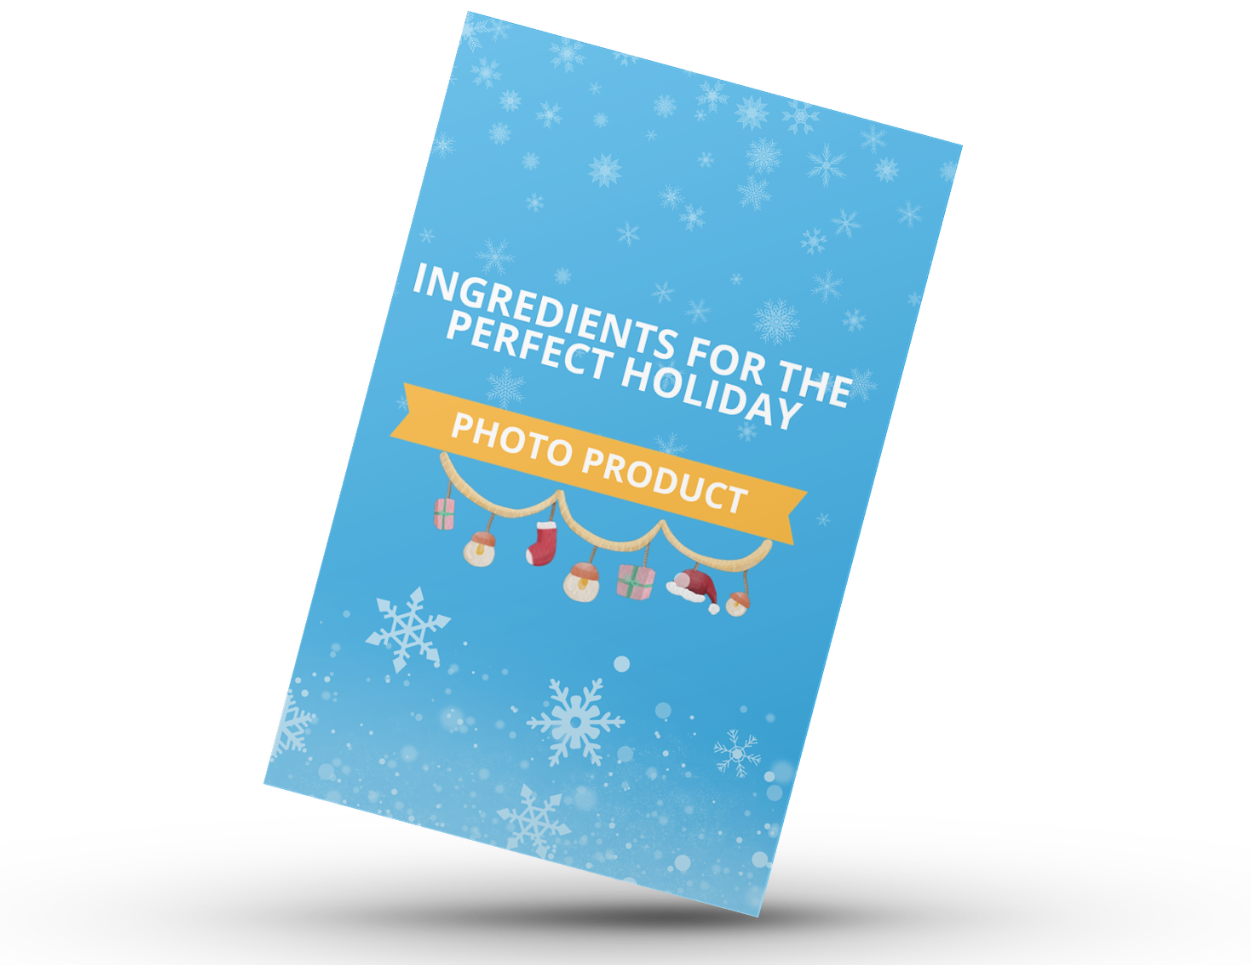 [infographic] Ingredients for the Perfect Holiday Photo Product Download 2-1